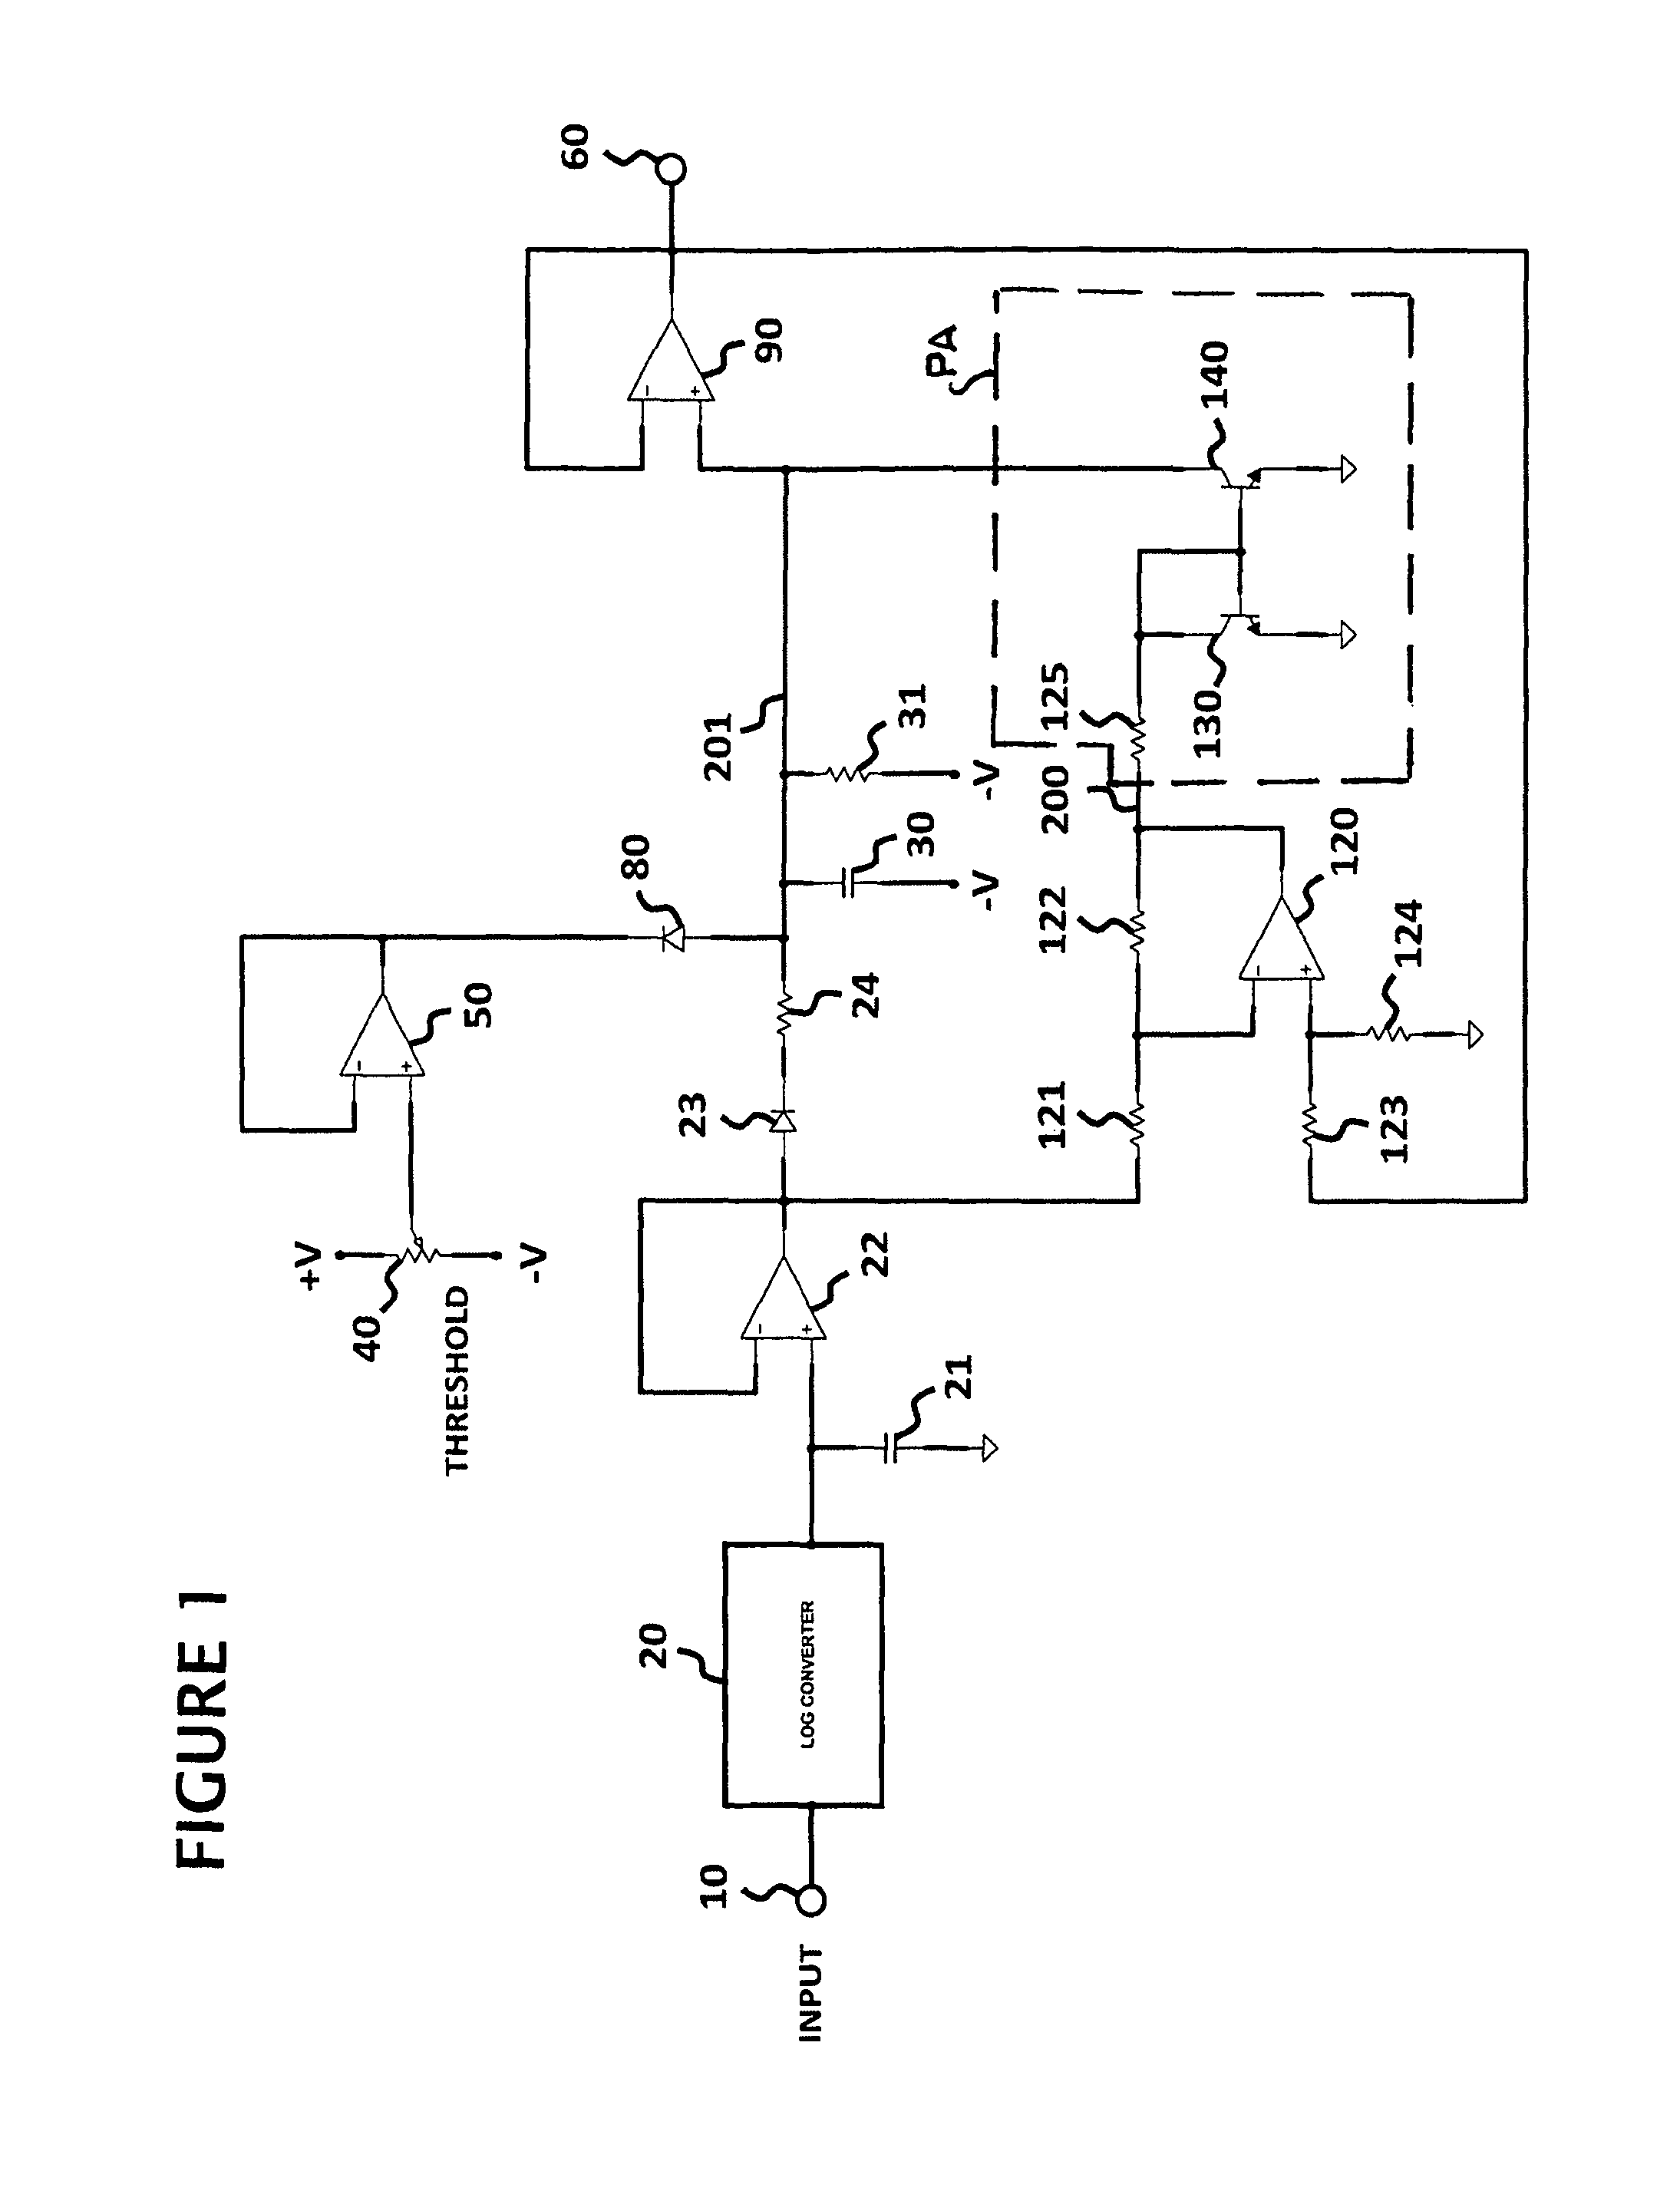 Audio dynamics processing control system with exponential release response